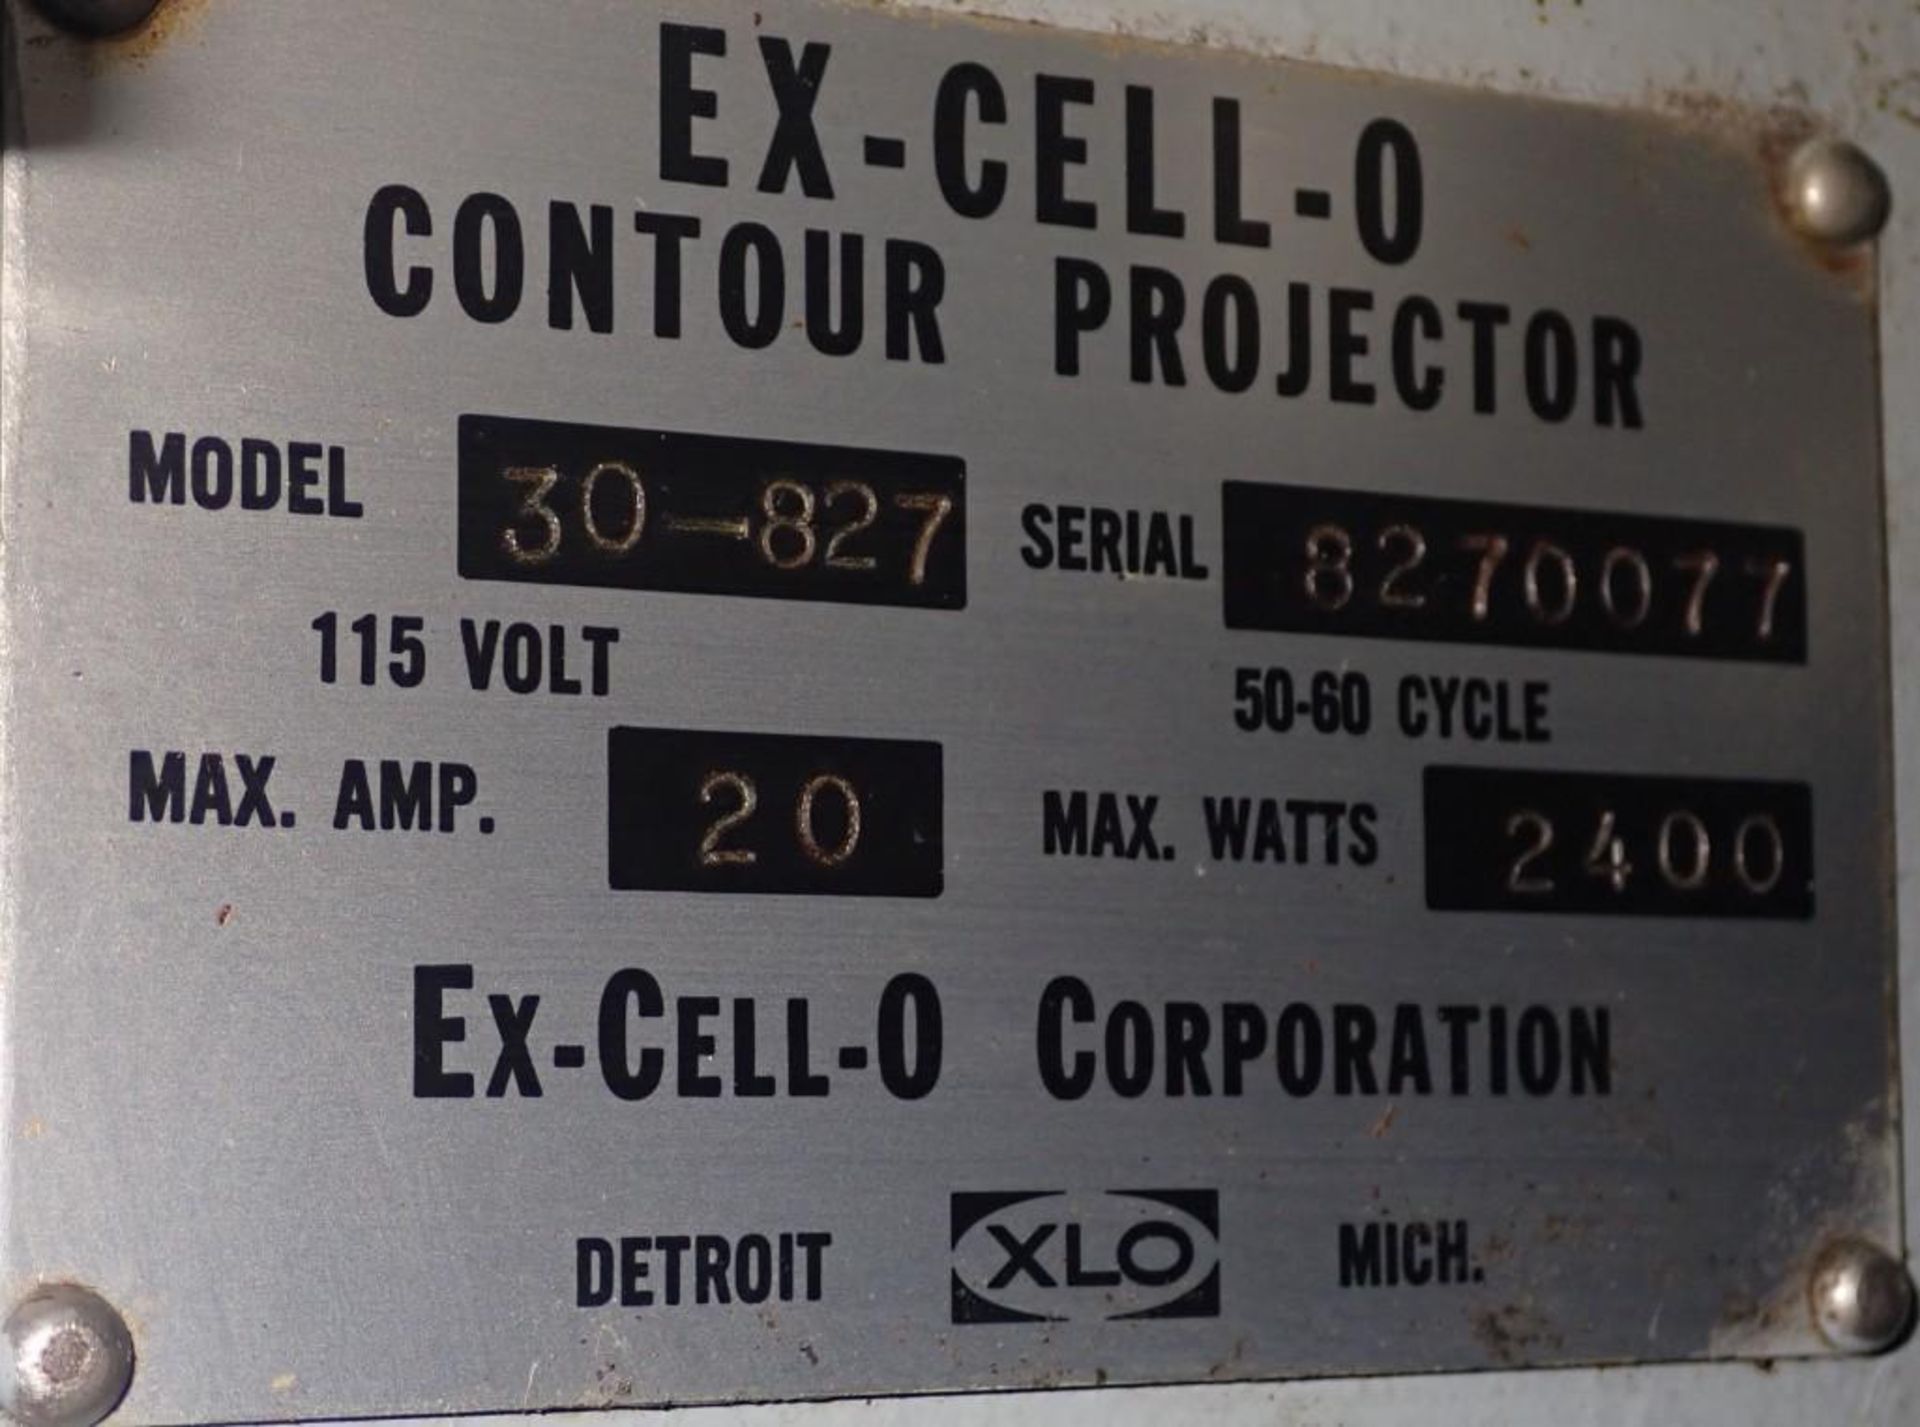 30" Ex-Cell-O #30-827 Contour Projector / Comparator - Image 12 of 12